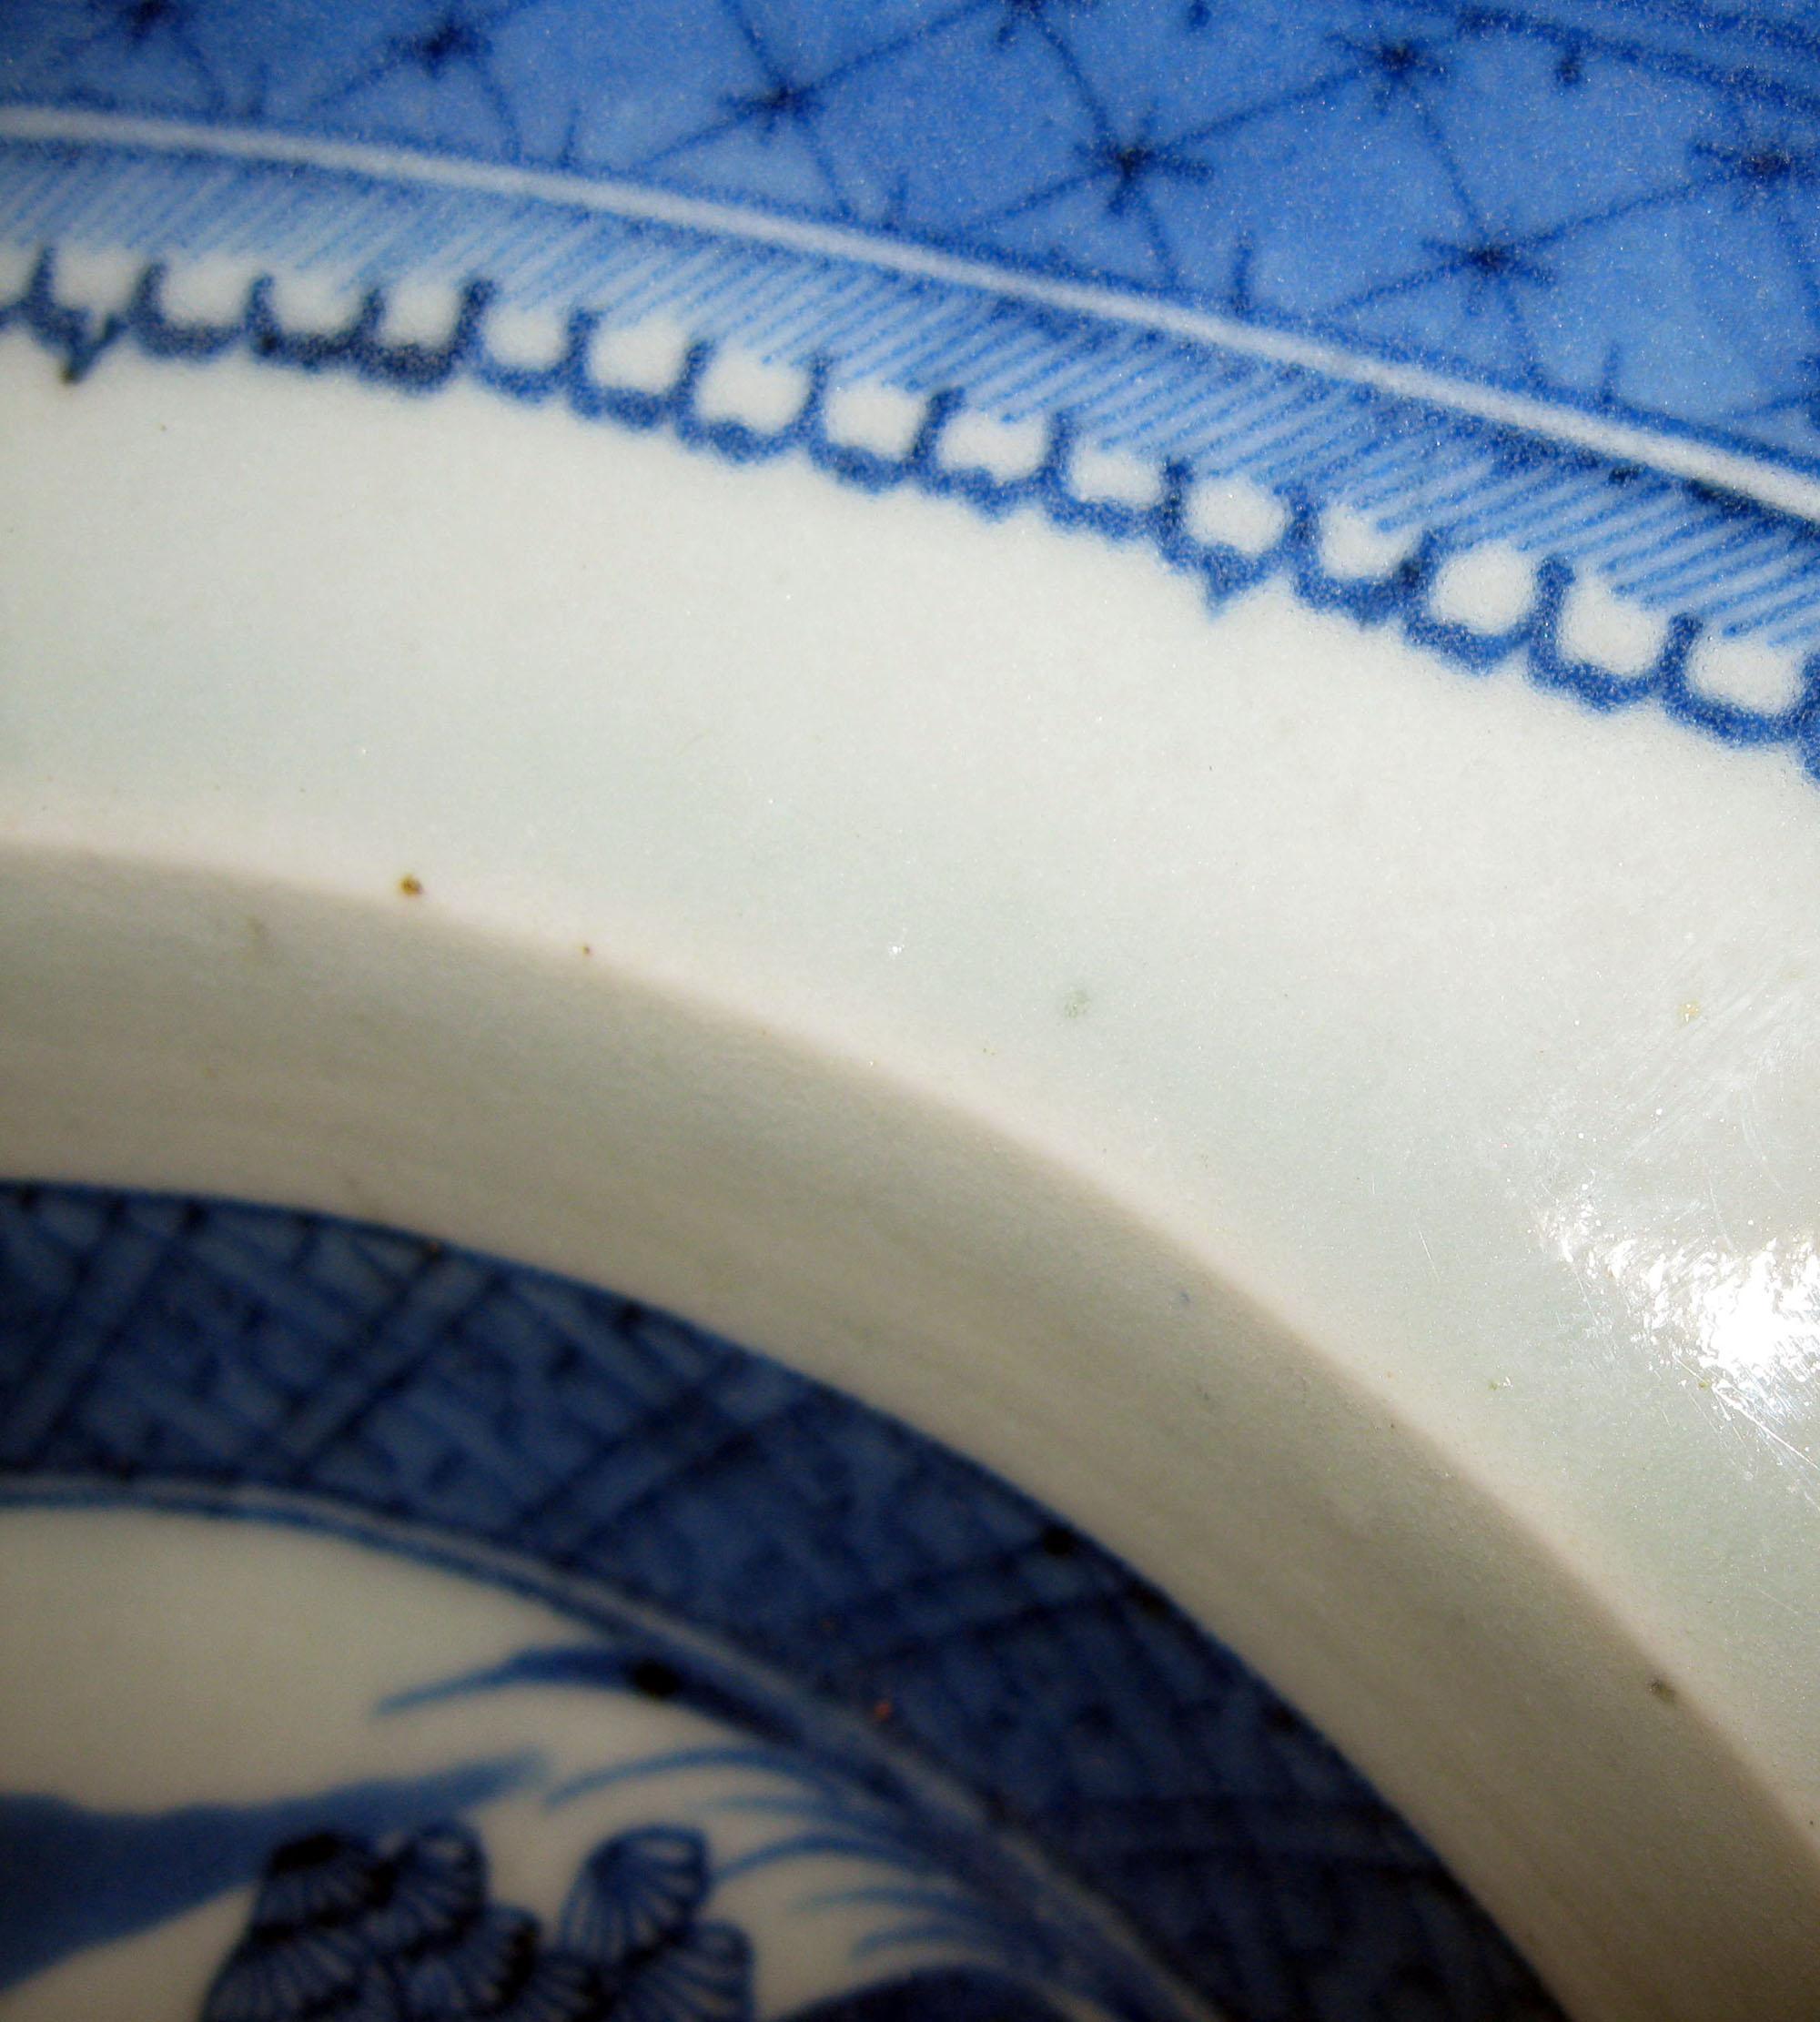 Early 19th Century 19th century Chinese Export Blue and White Canton Ware Deep Platter